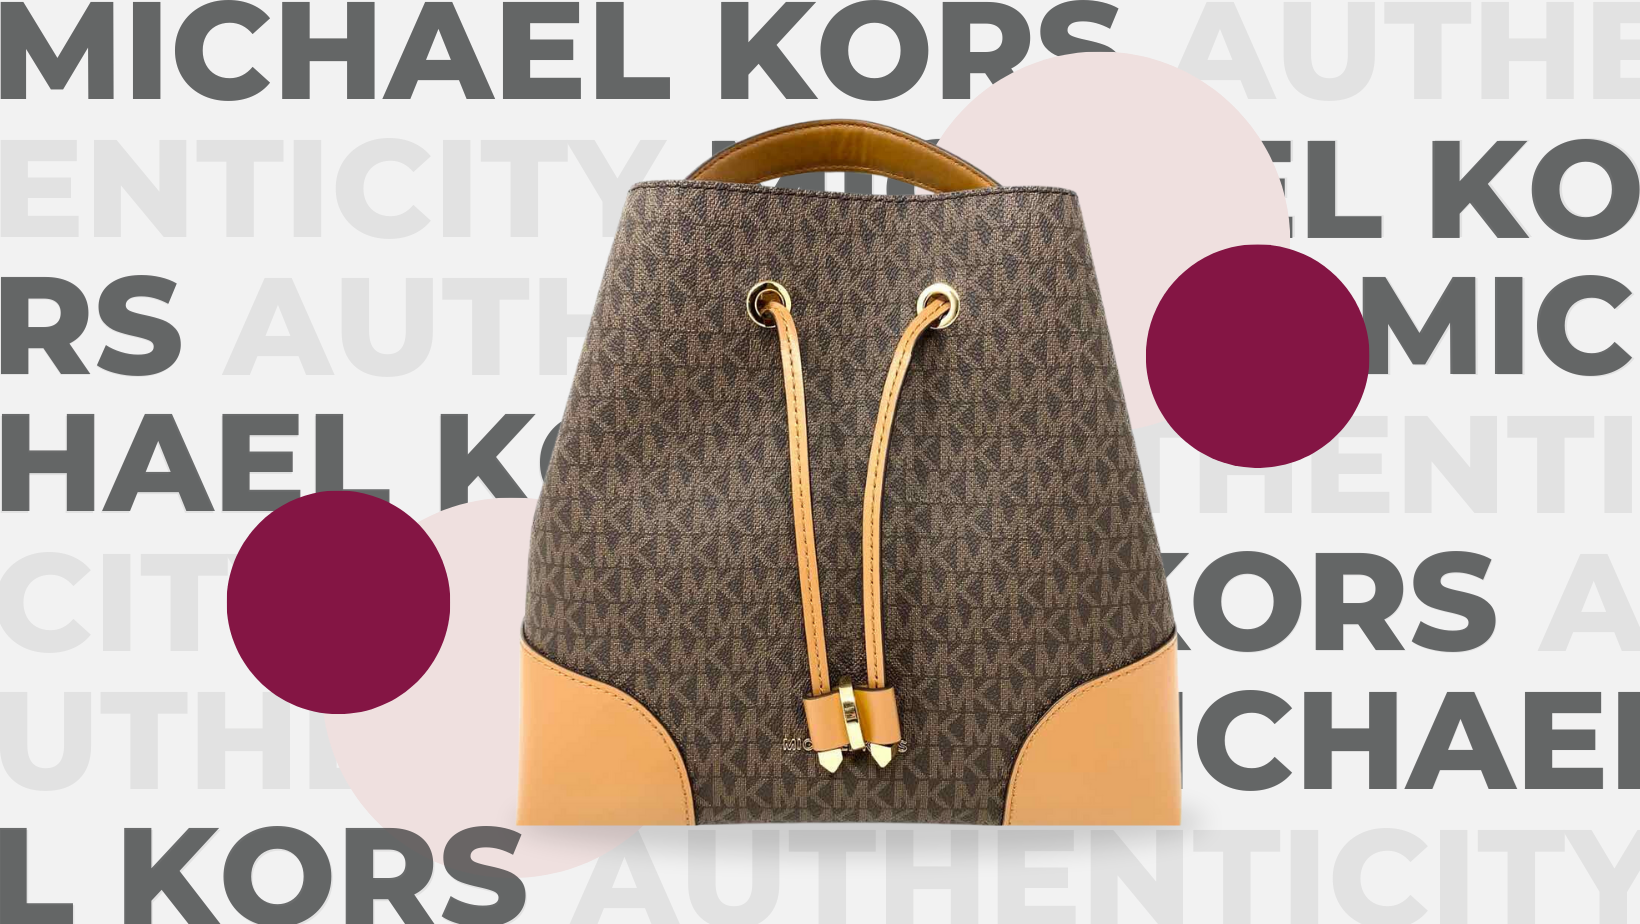 How to Tell if Your Michael Kors is Authentic